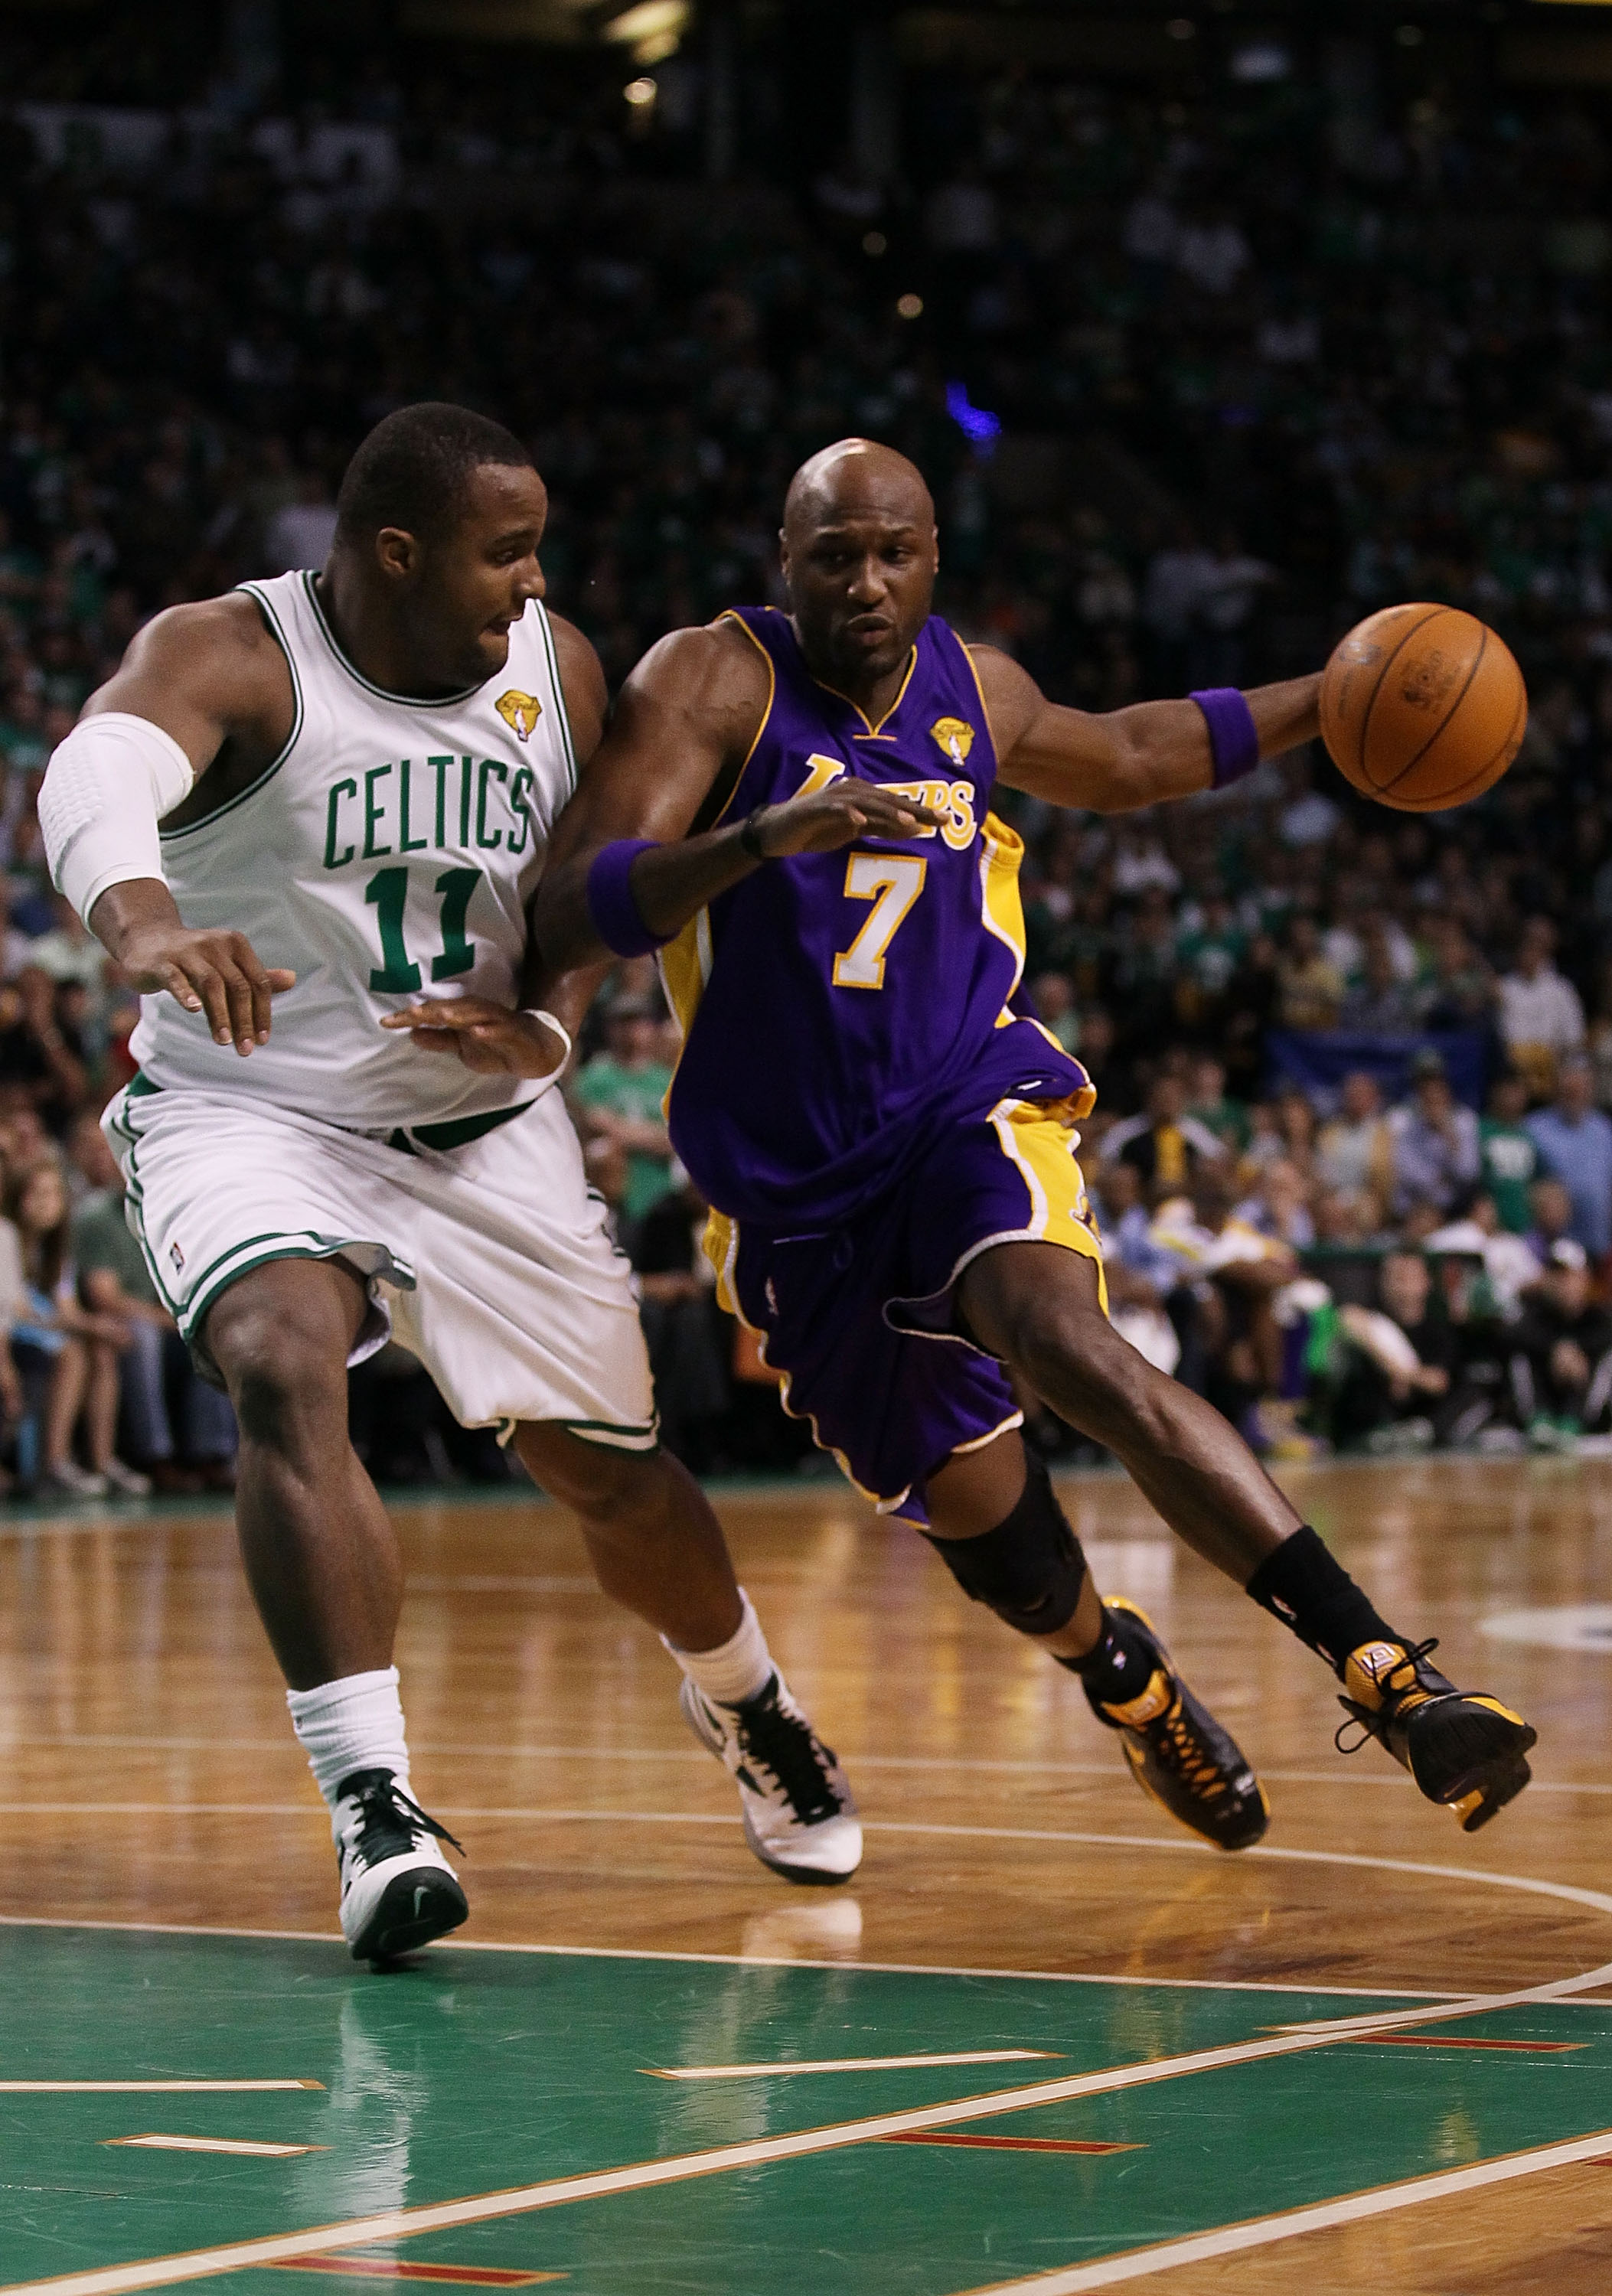 BOSTON - JUNE 13:  Lamar Odom #7 of the Los Angeles Lakers drives to the basket against Glen Davis #11 of the Boston Celtics during Game Five of the 2010 NBA Finals on June 13, 2010 at TD Garden in Boston, Massachusetts. NOTE TO USER: User expressly ackno